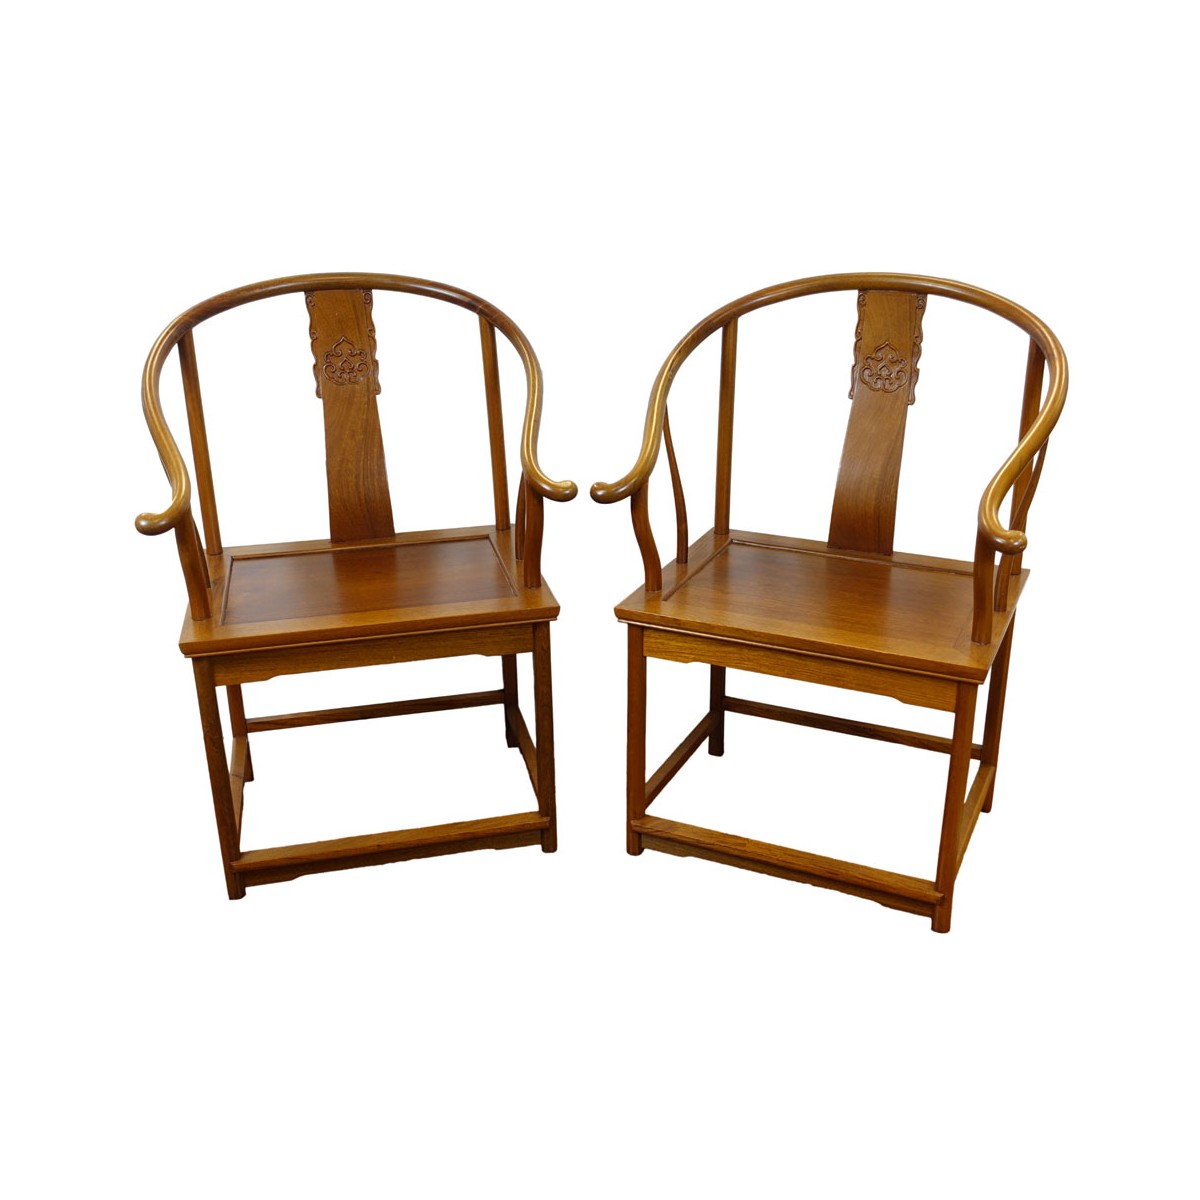 Pair of Contemporary Carved Teak Ox Bow Chairs. Bo